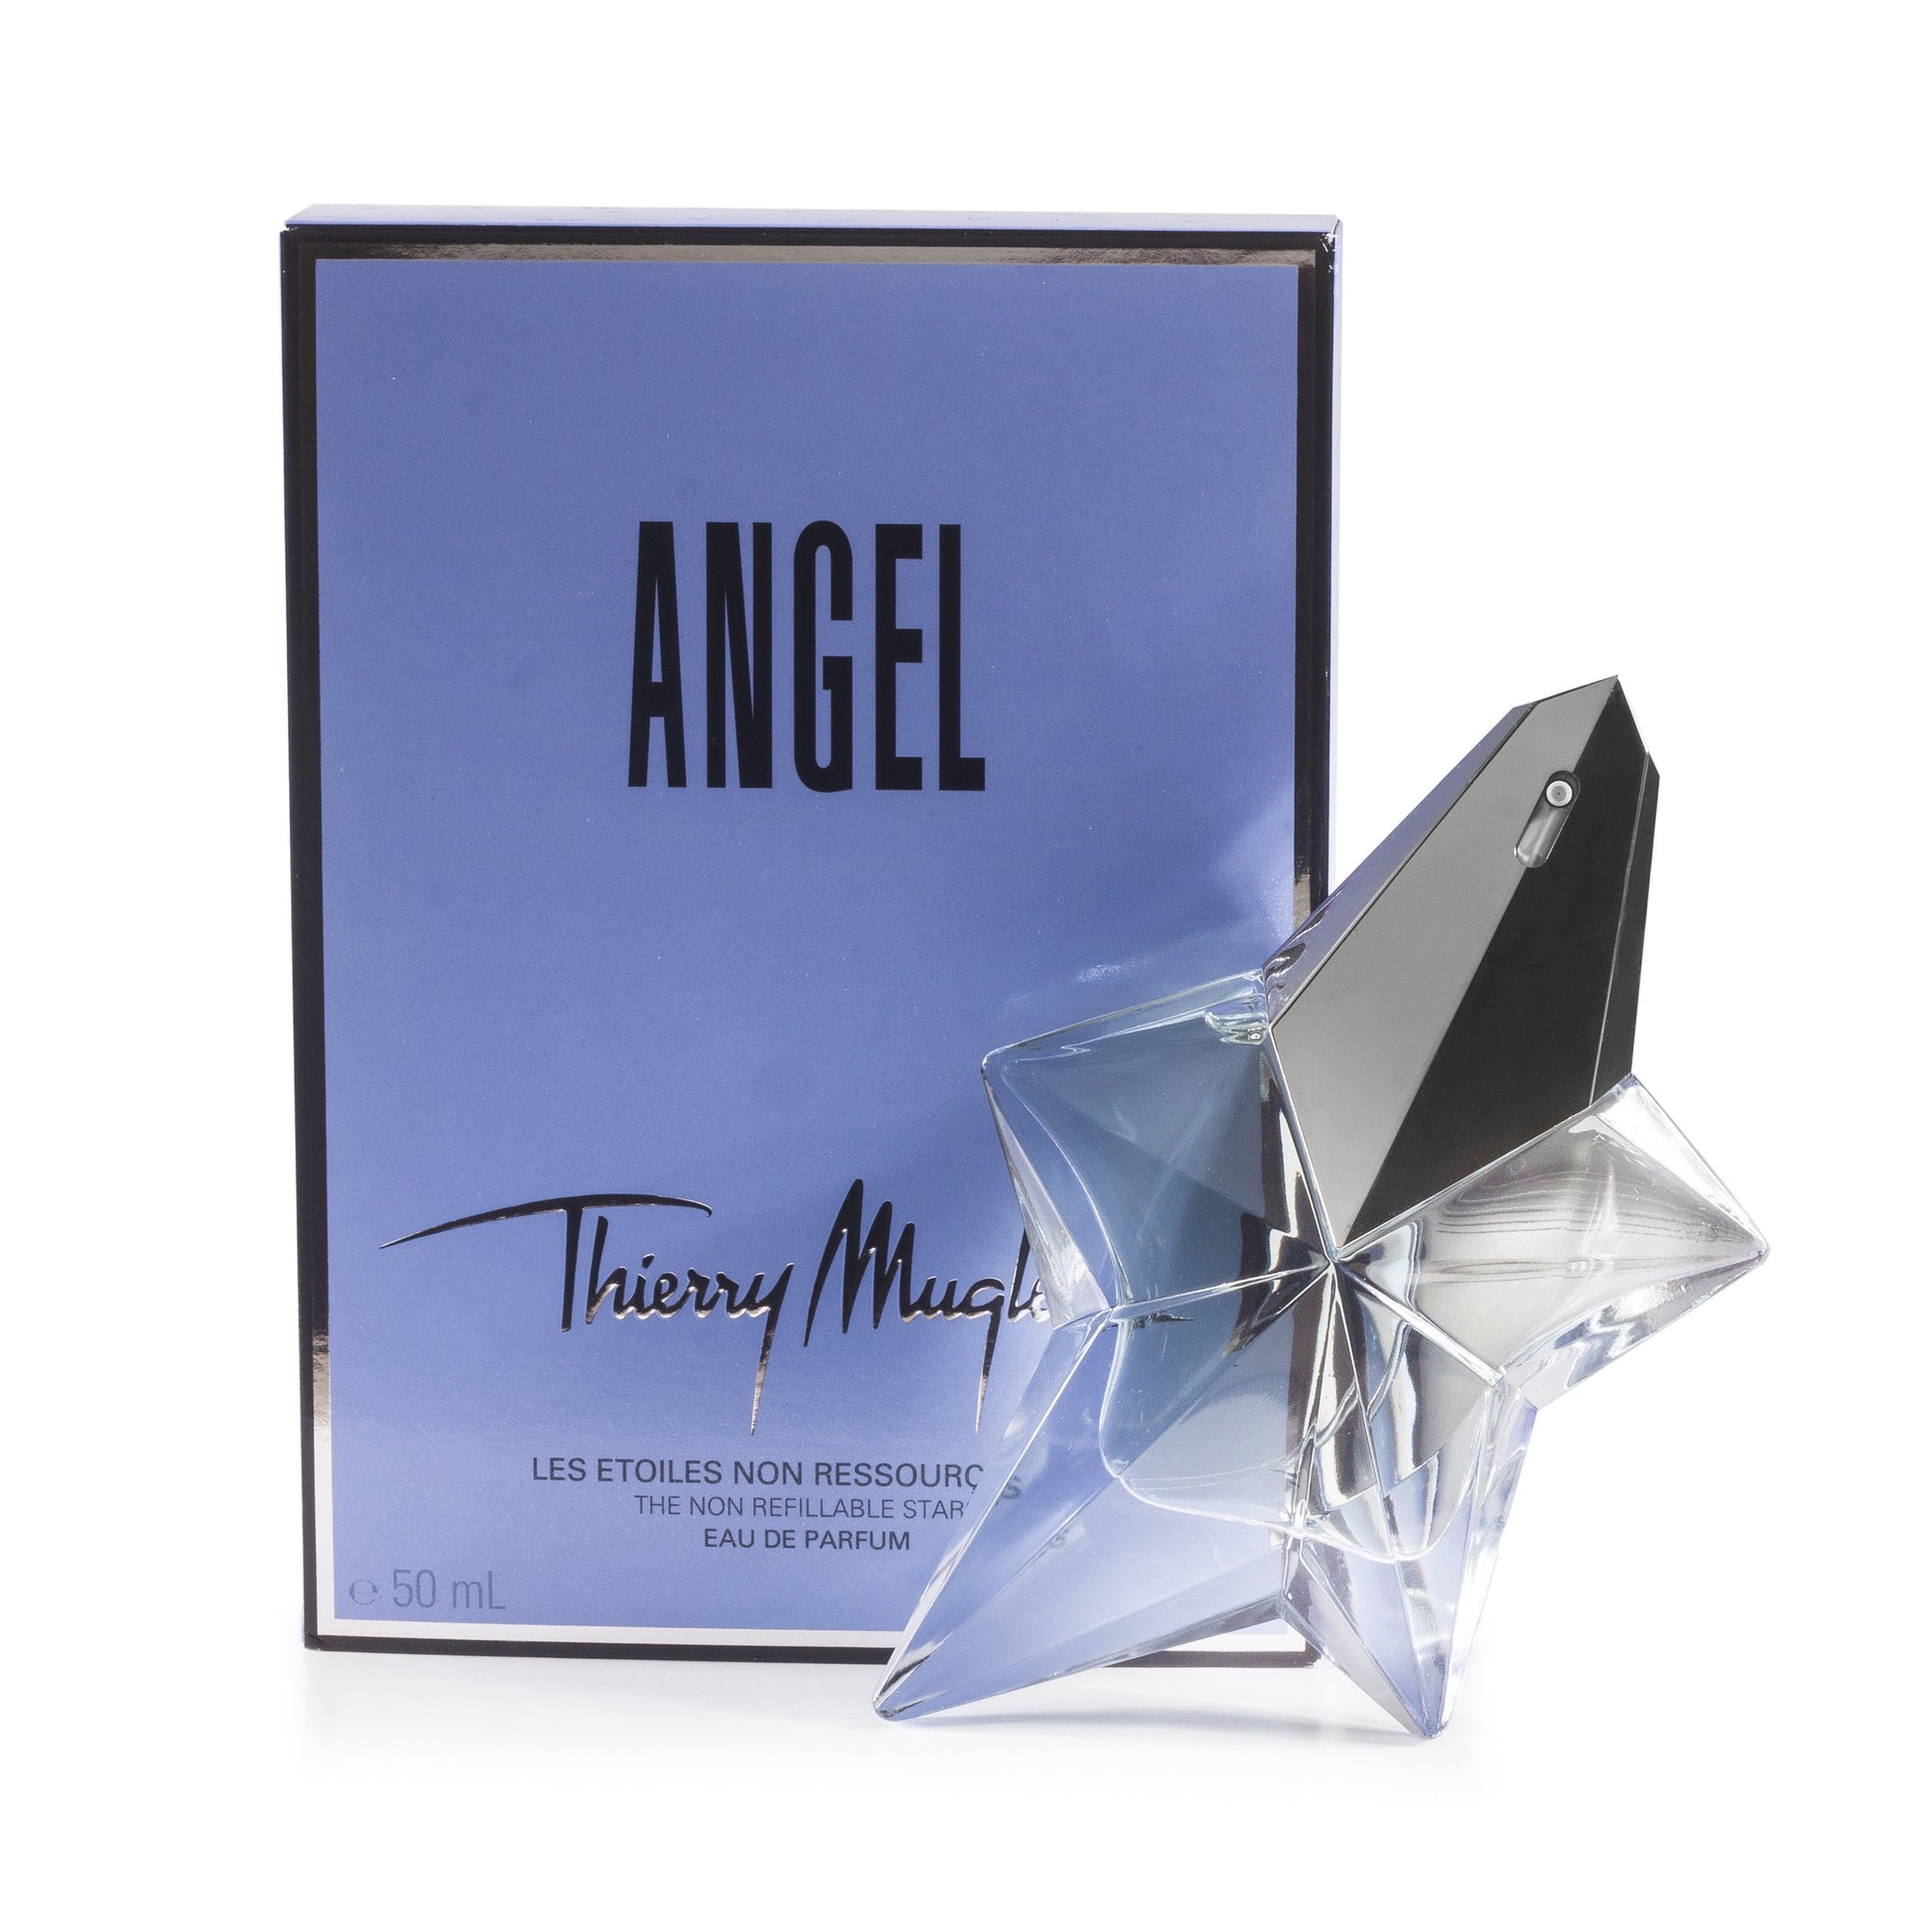 Angel Non Refillable Eau de Parfum Spray for Women by Thierry Mugler, Product image 1